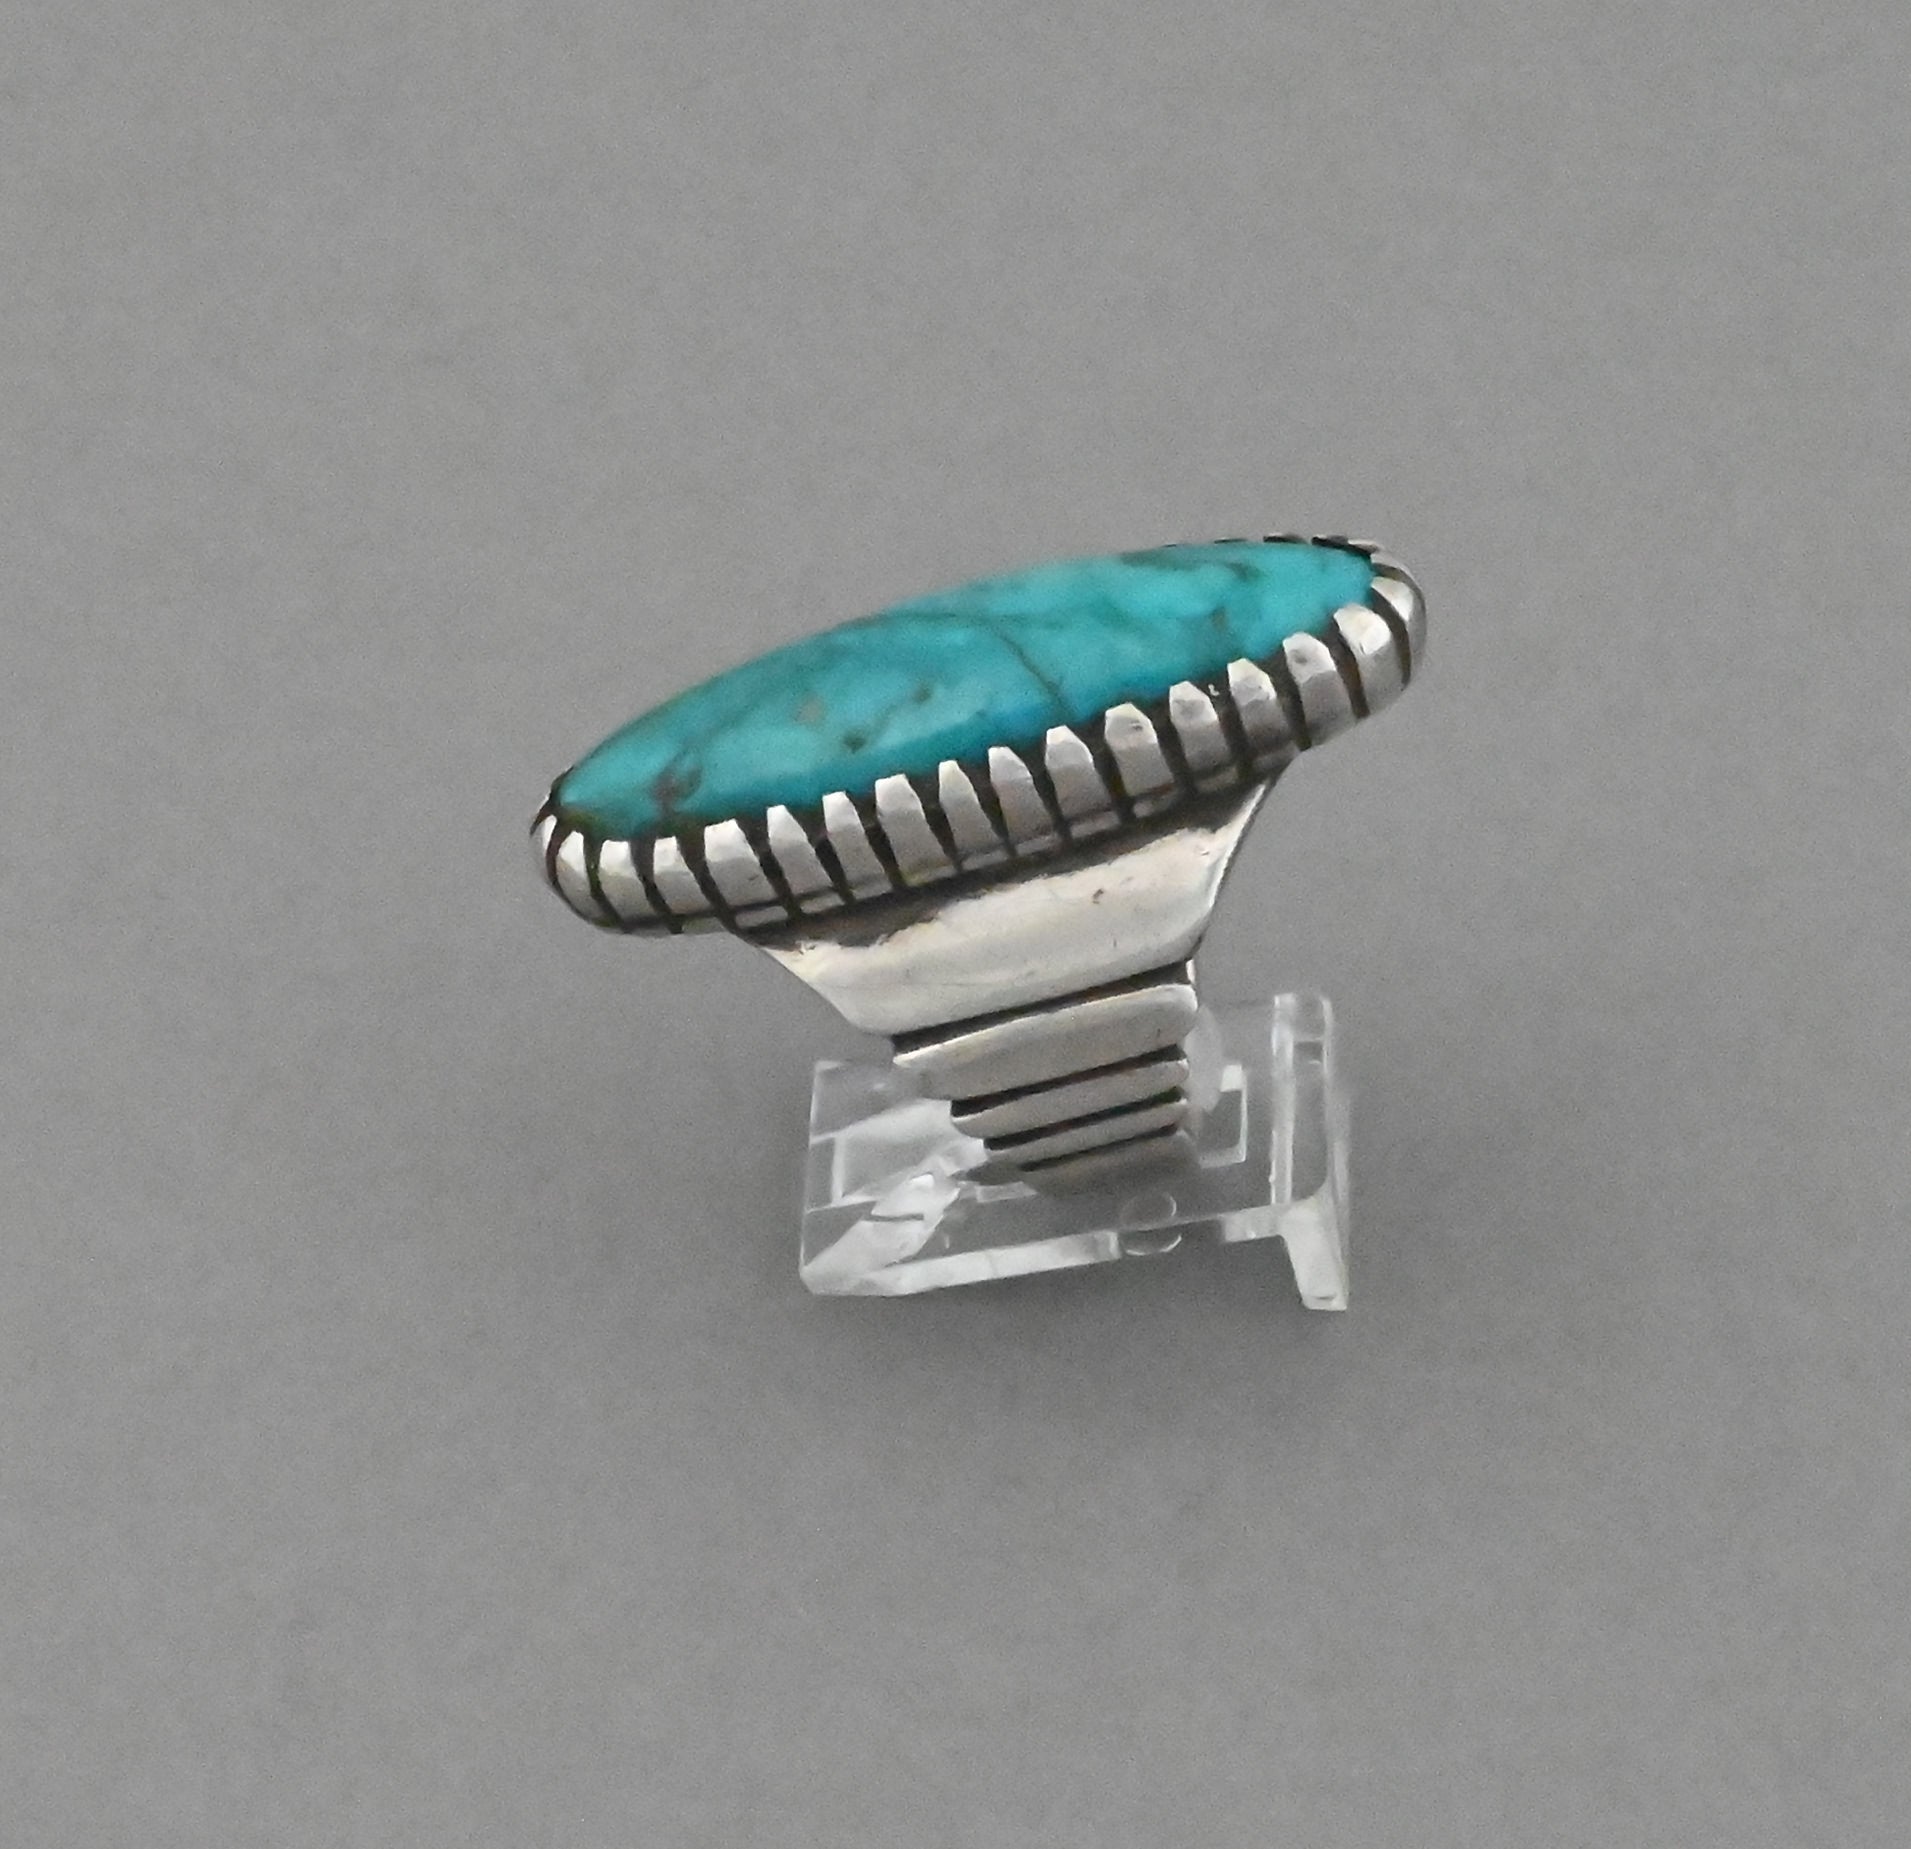 Ring with Blue Gem Turquoise by Dan Jackson